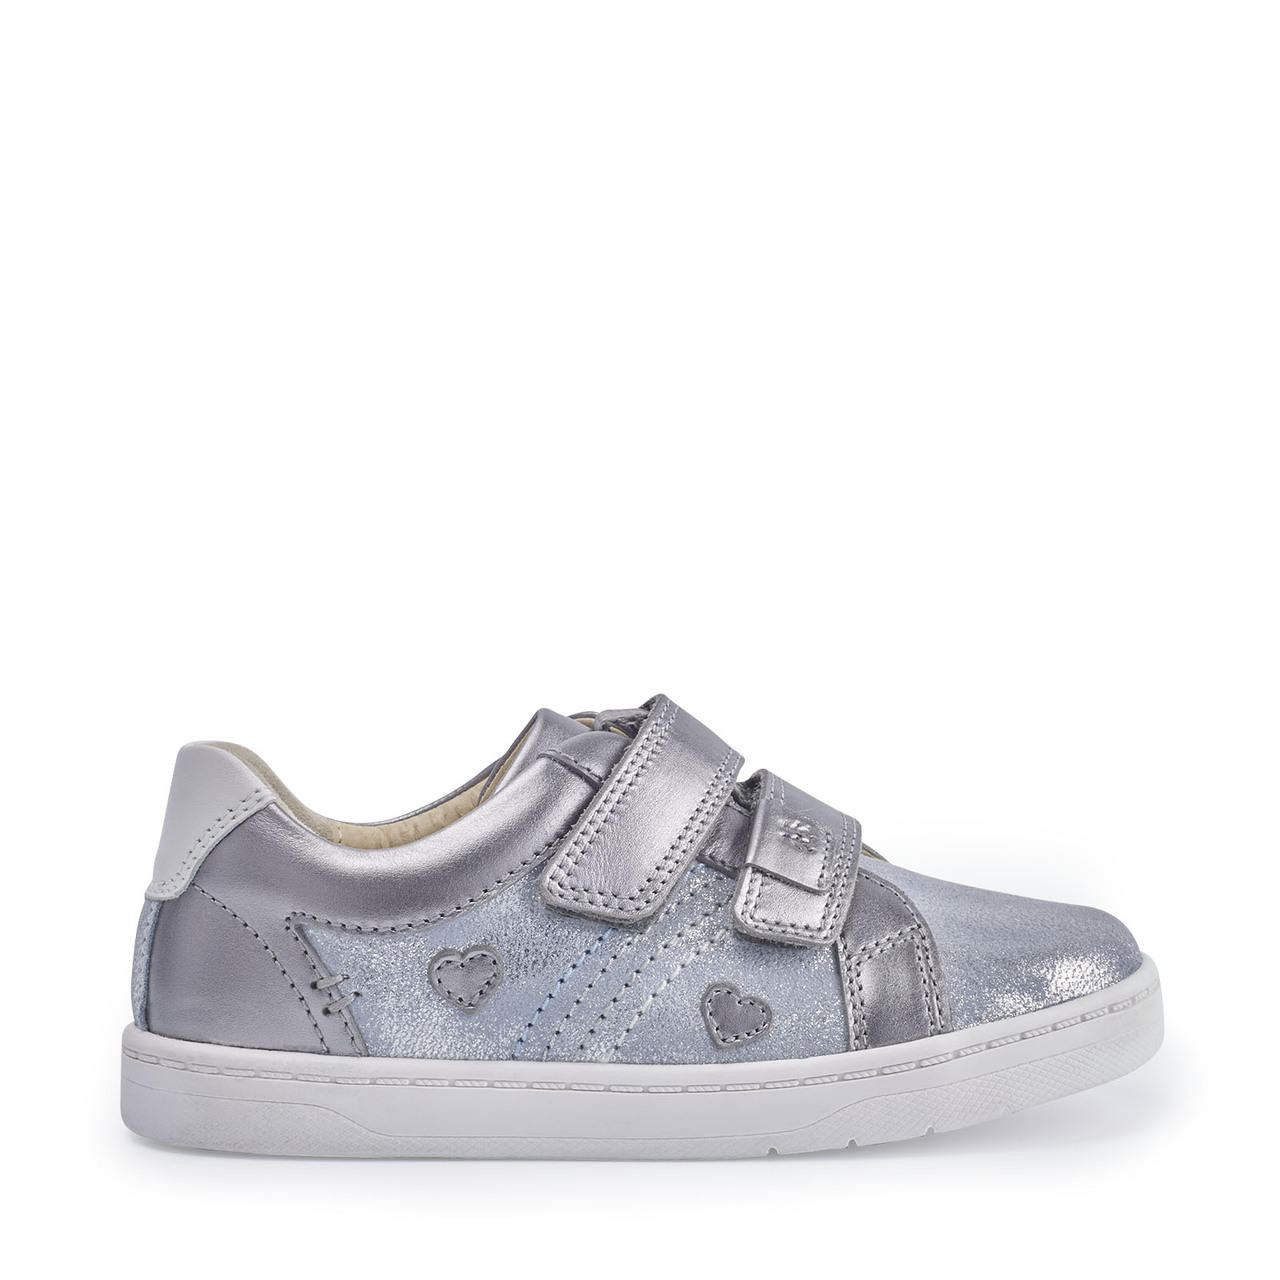 New Girls Shoe Arrivals | New in Shoes for Girls | Start-Rite Shoes